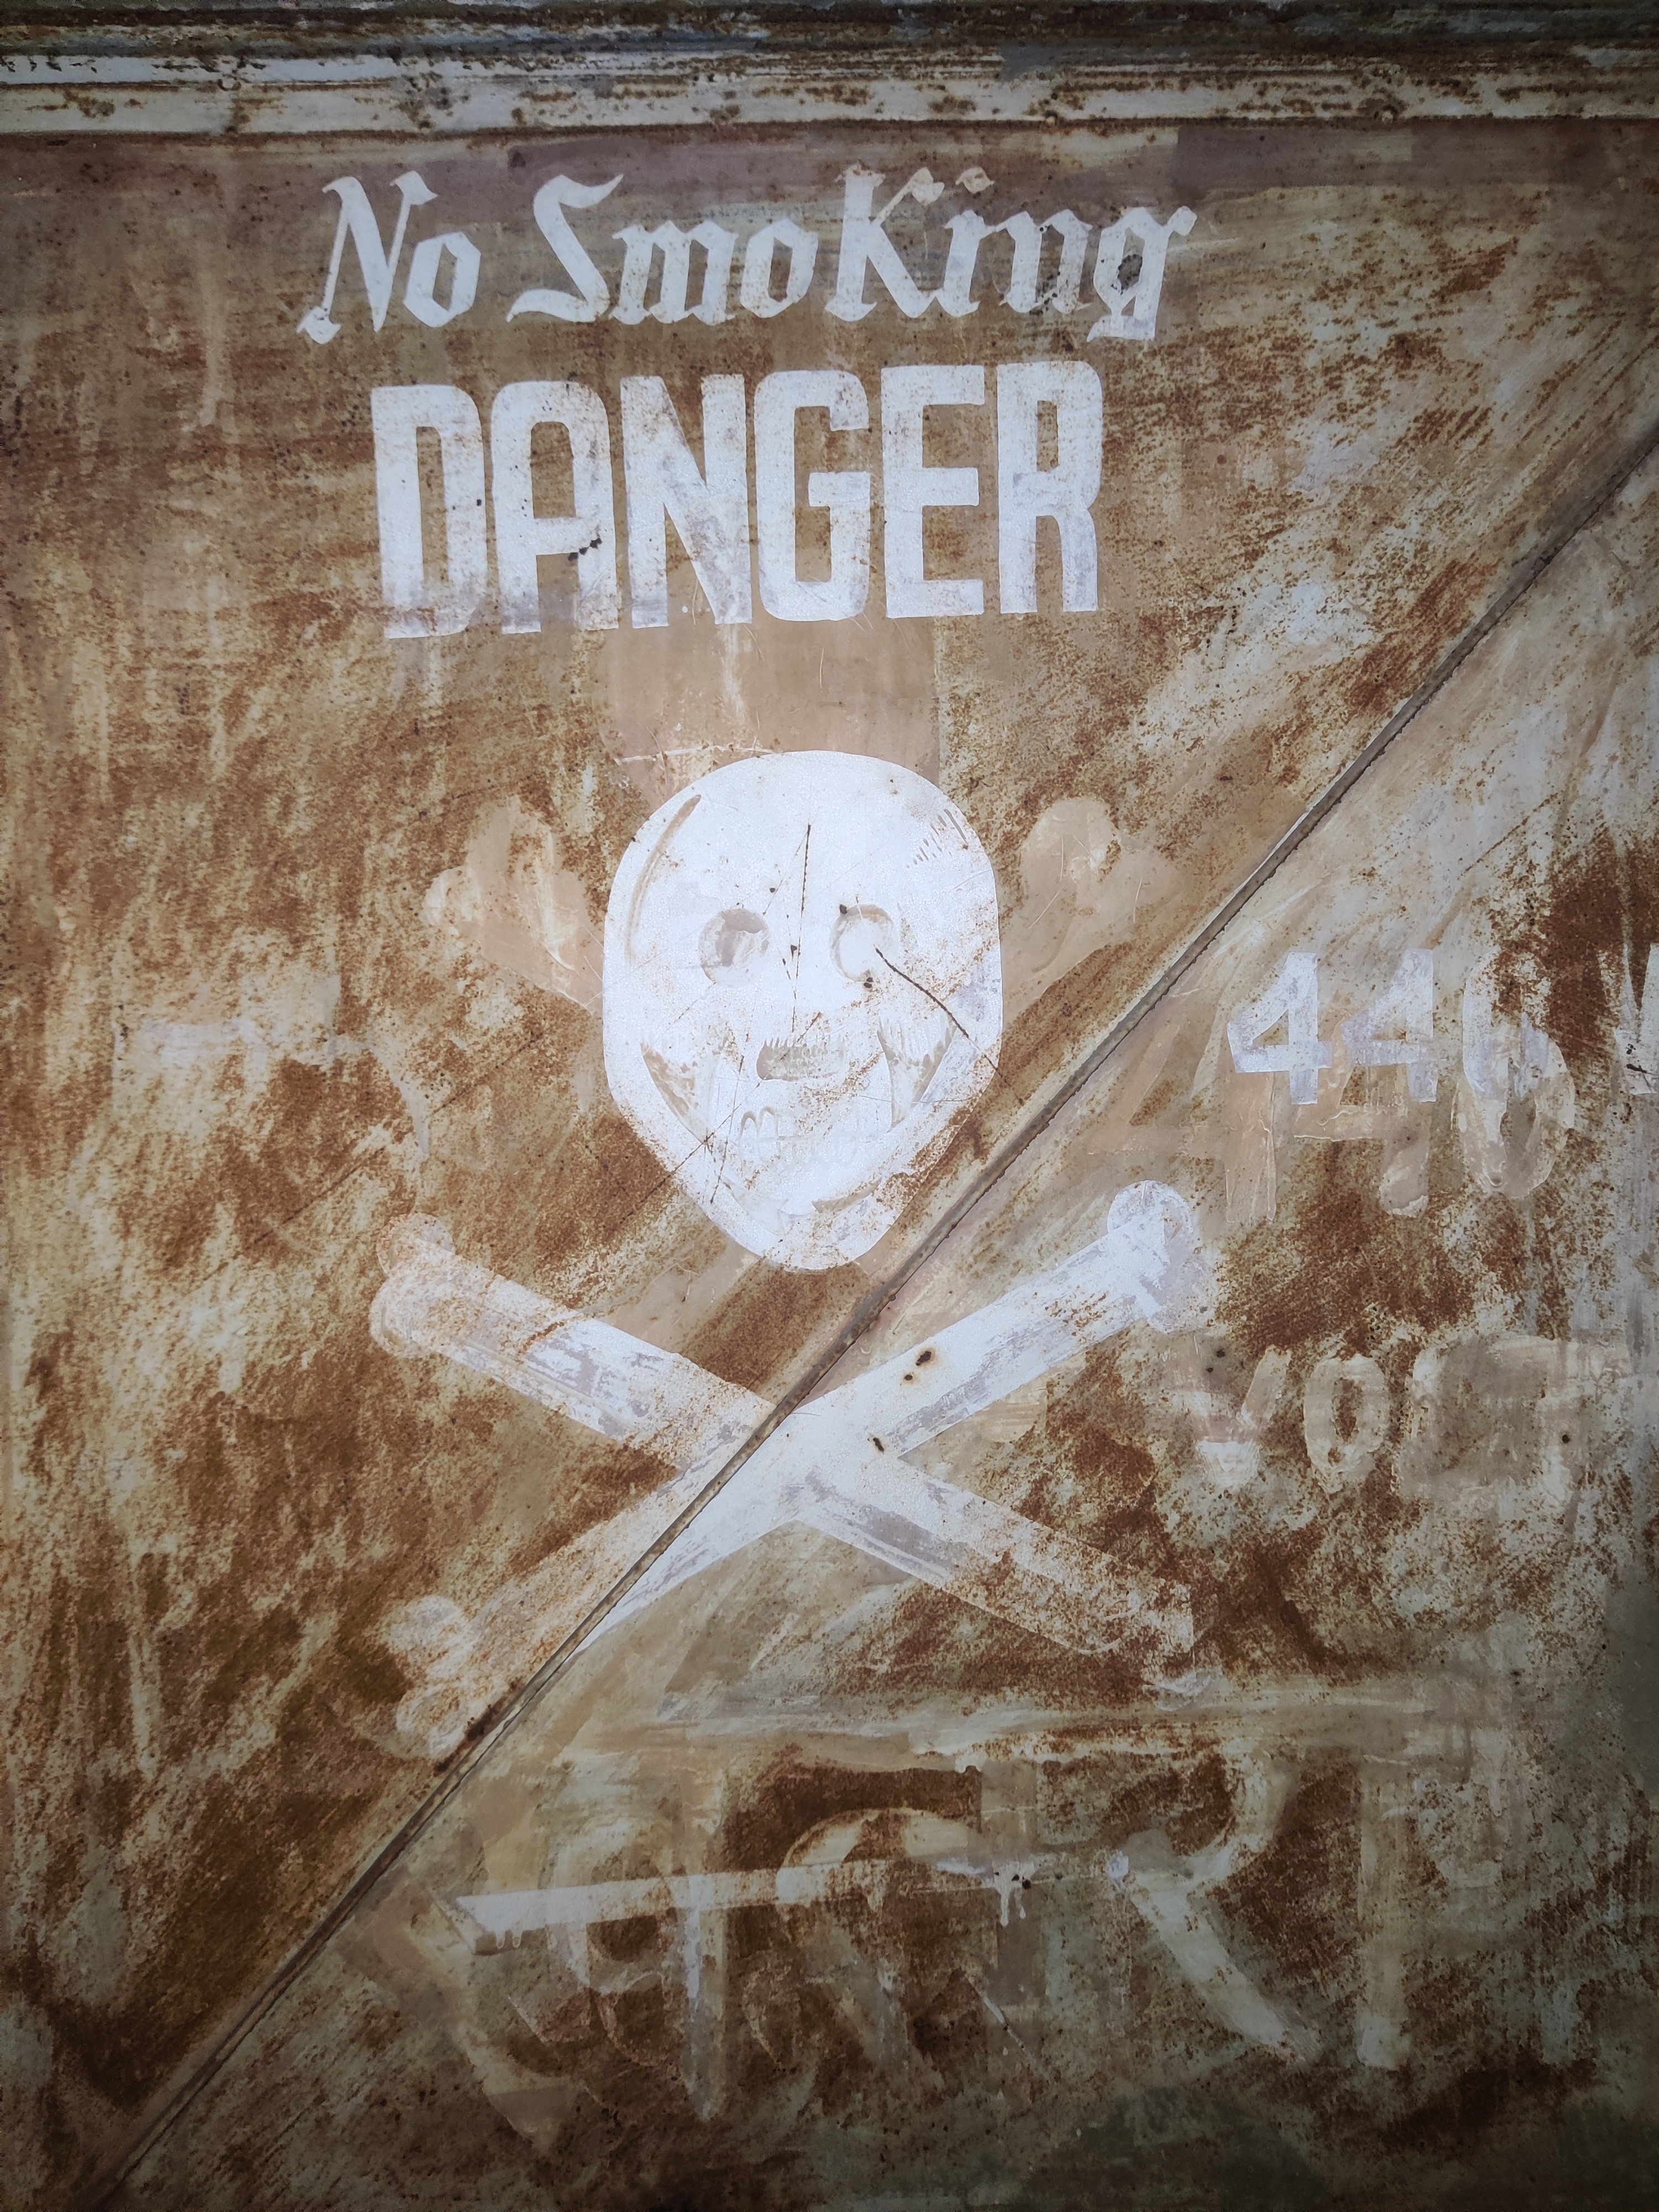 Picture depicting a rusted door with "No SmoKing" and "DANGER" written on it along with a skull and bones, likely leading to a power substation